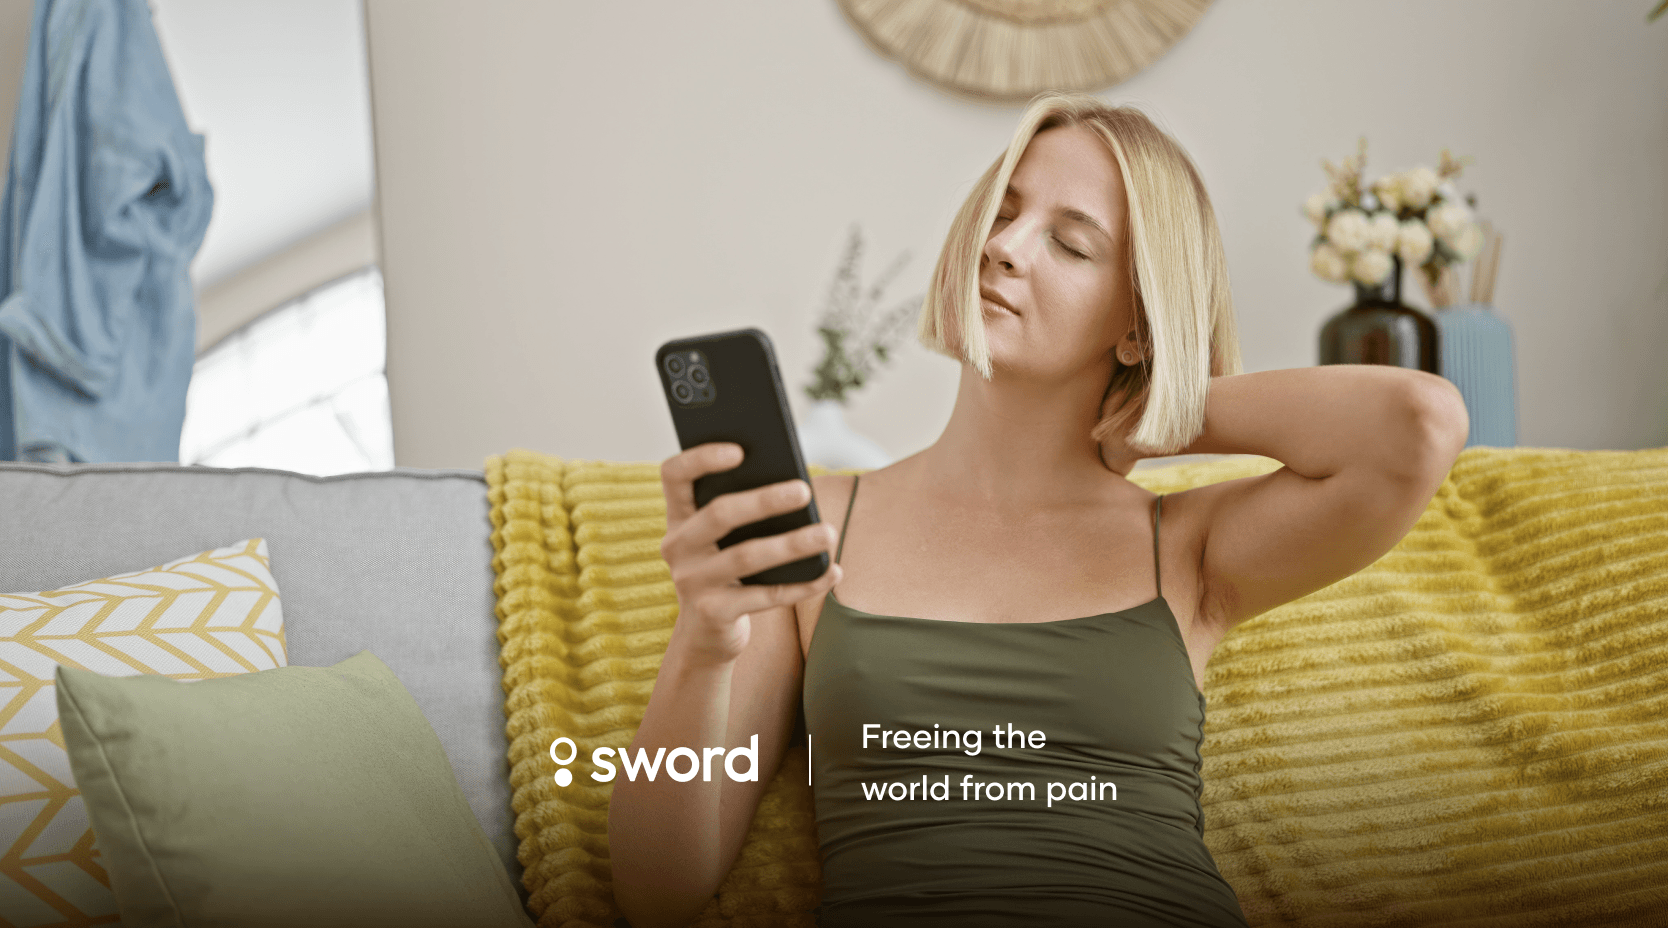 Sword On-Call text-based solution for 24/7 access to pain specialists